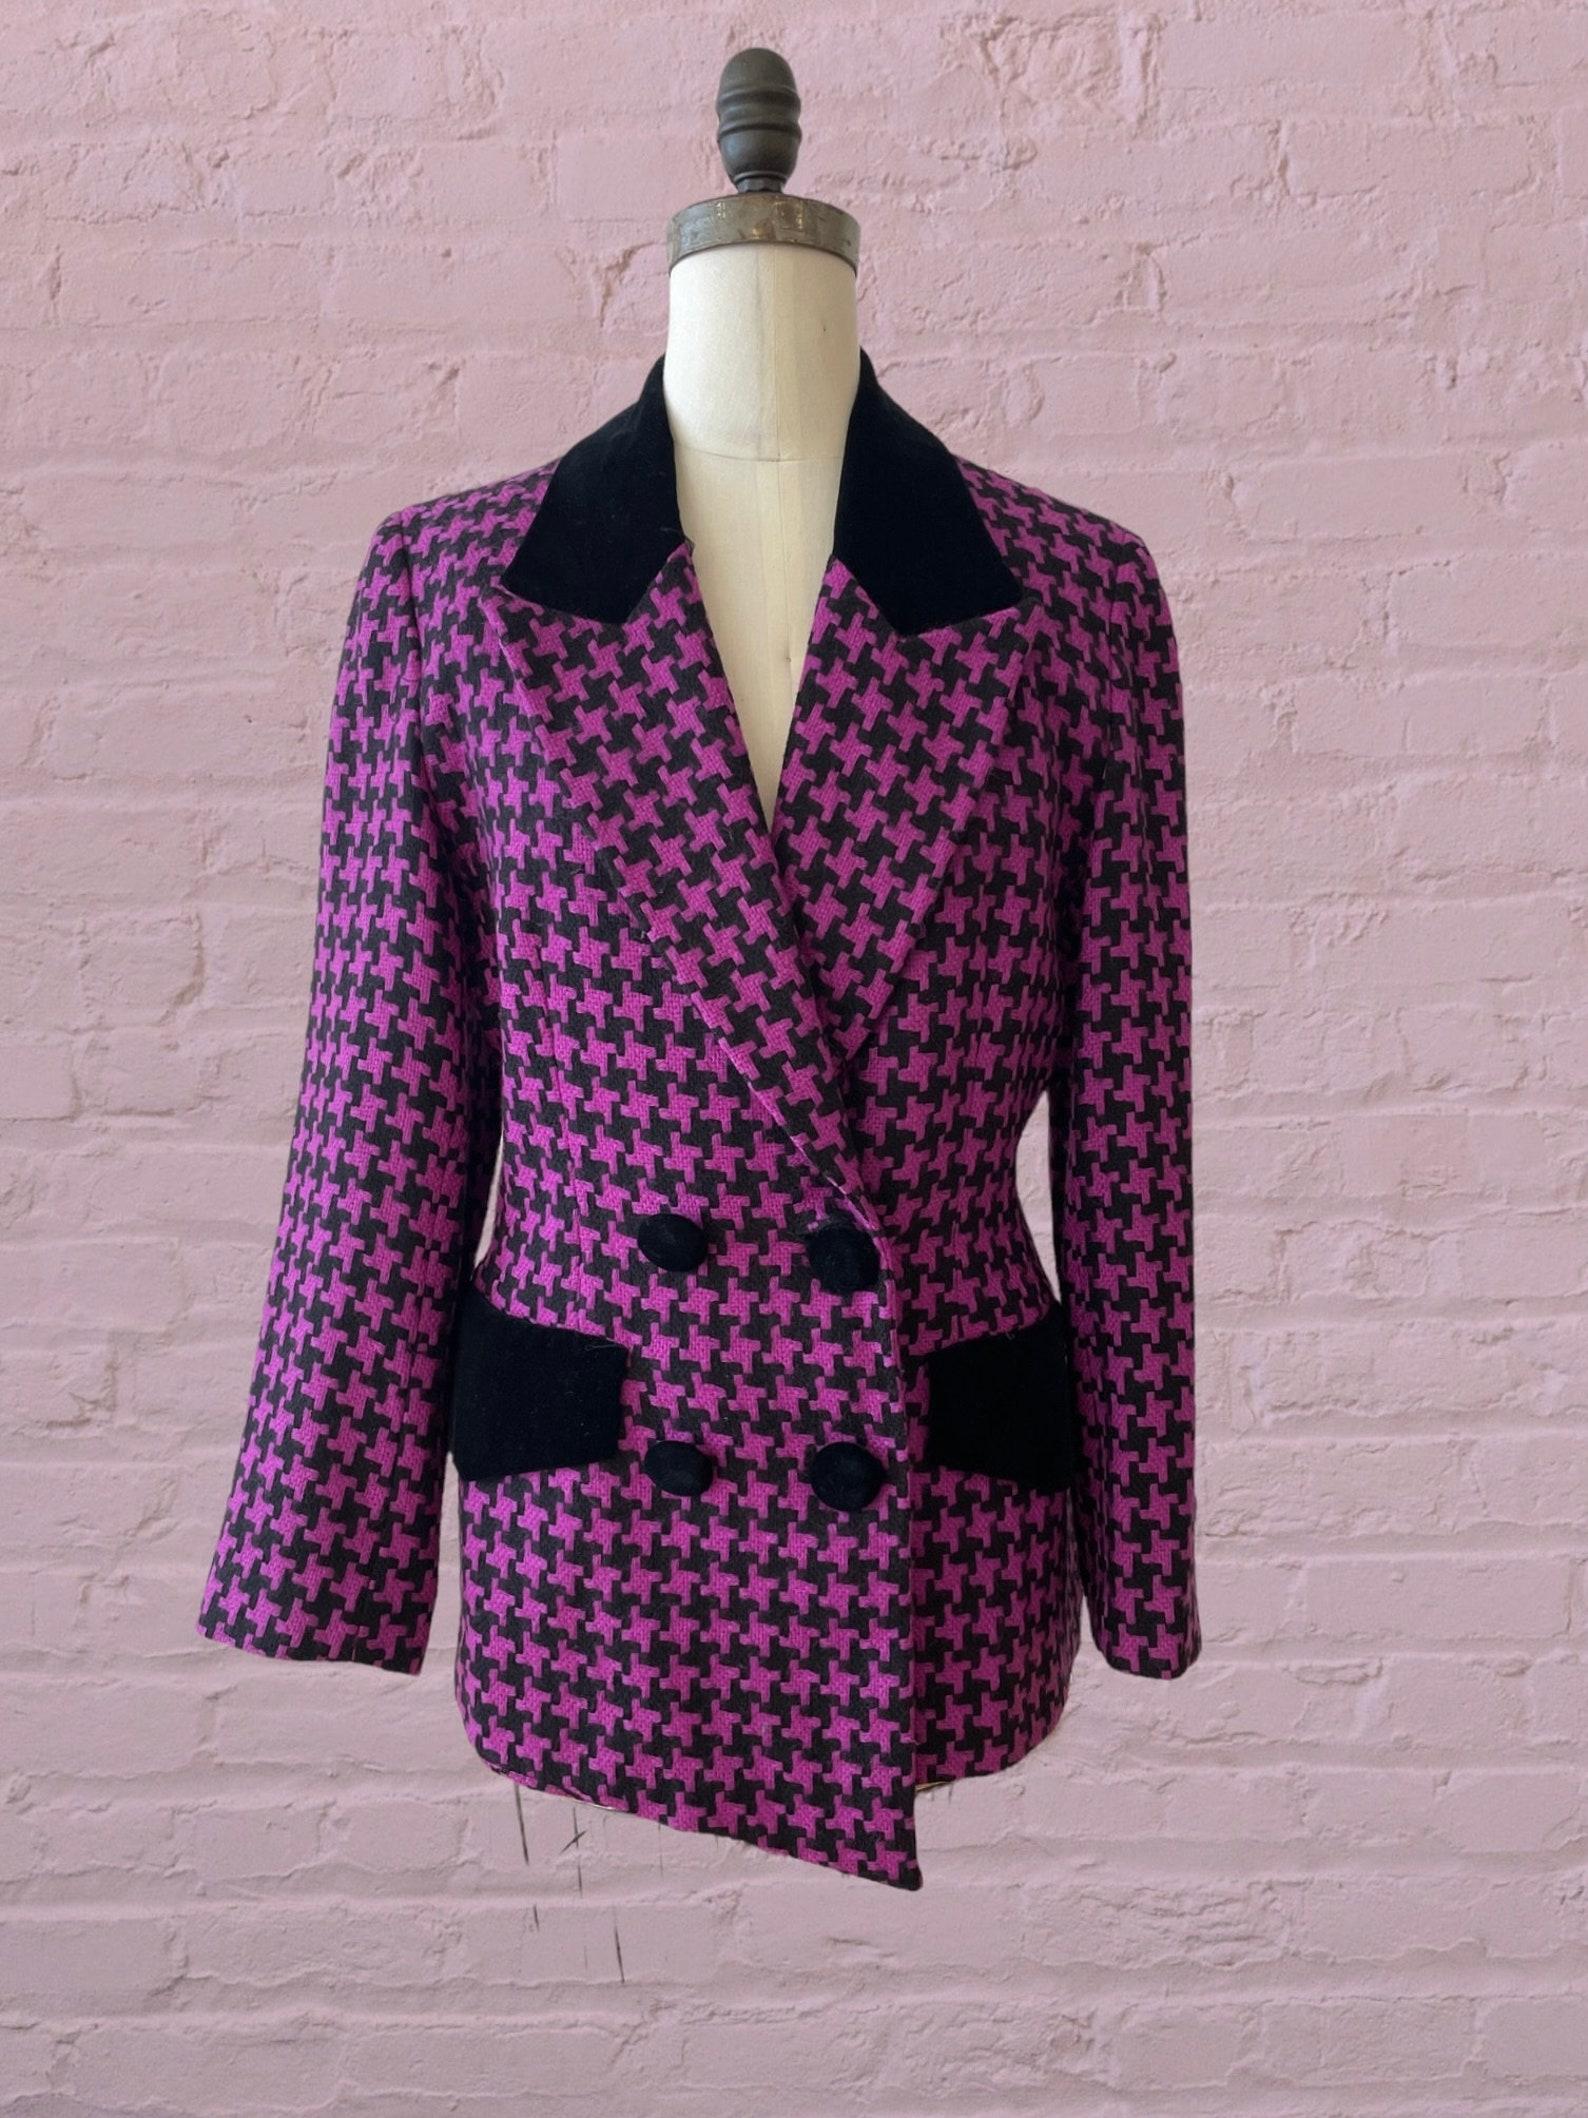 Vintage Lillie Rubin double breasted blazer. peaked lapel. purple and black houndstooth. flap pockets. small built in shoulder pads. dry cleaned.

Circa 1980s - 1990s
Lillie Rubin
Made in USA
Wool/Velvet
Tagged size is 8
Plum Purple/Black
Excellent